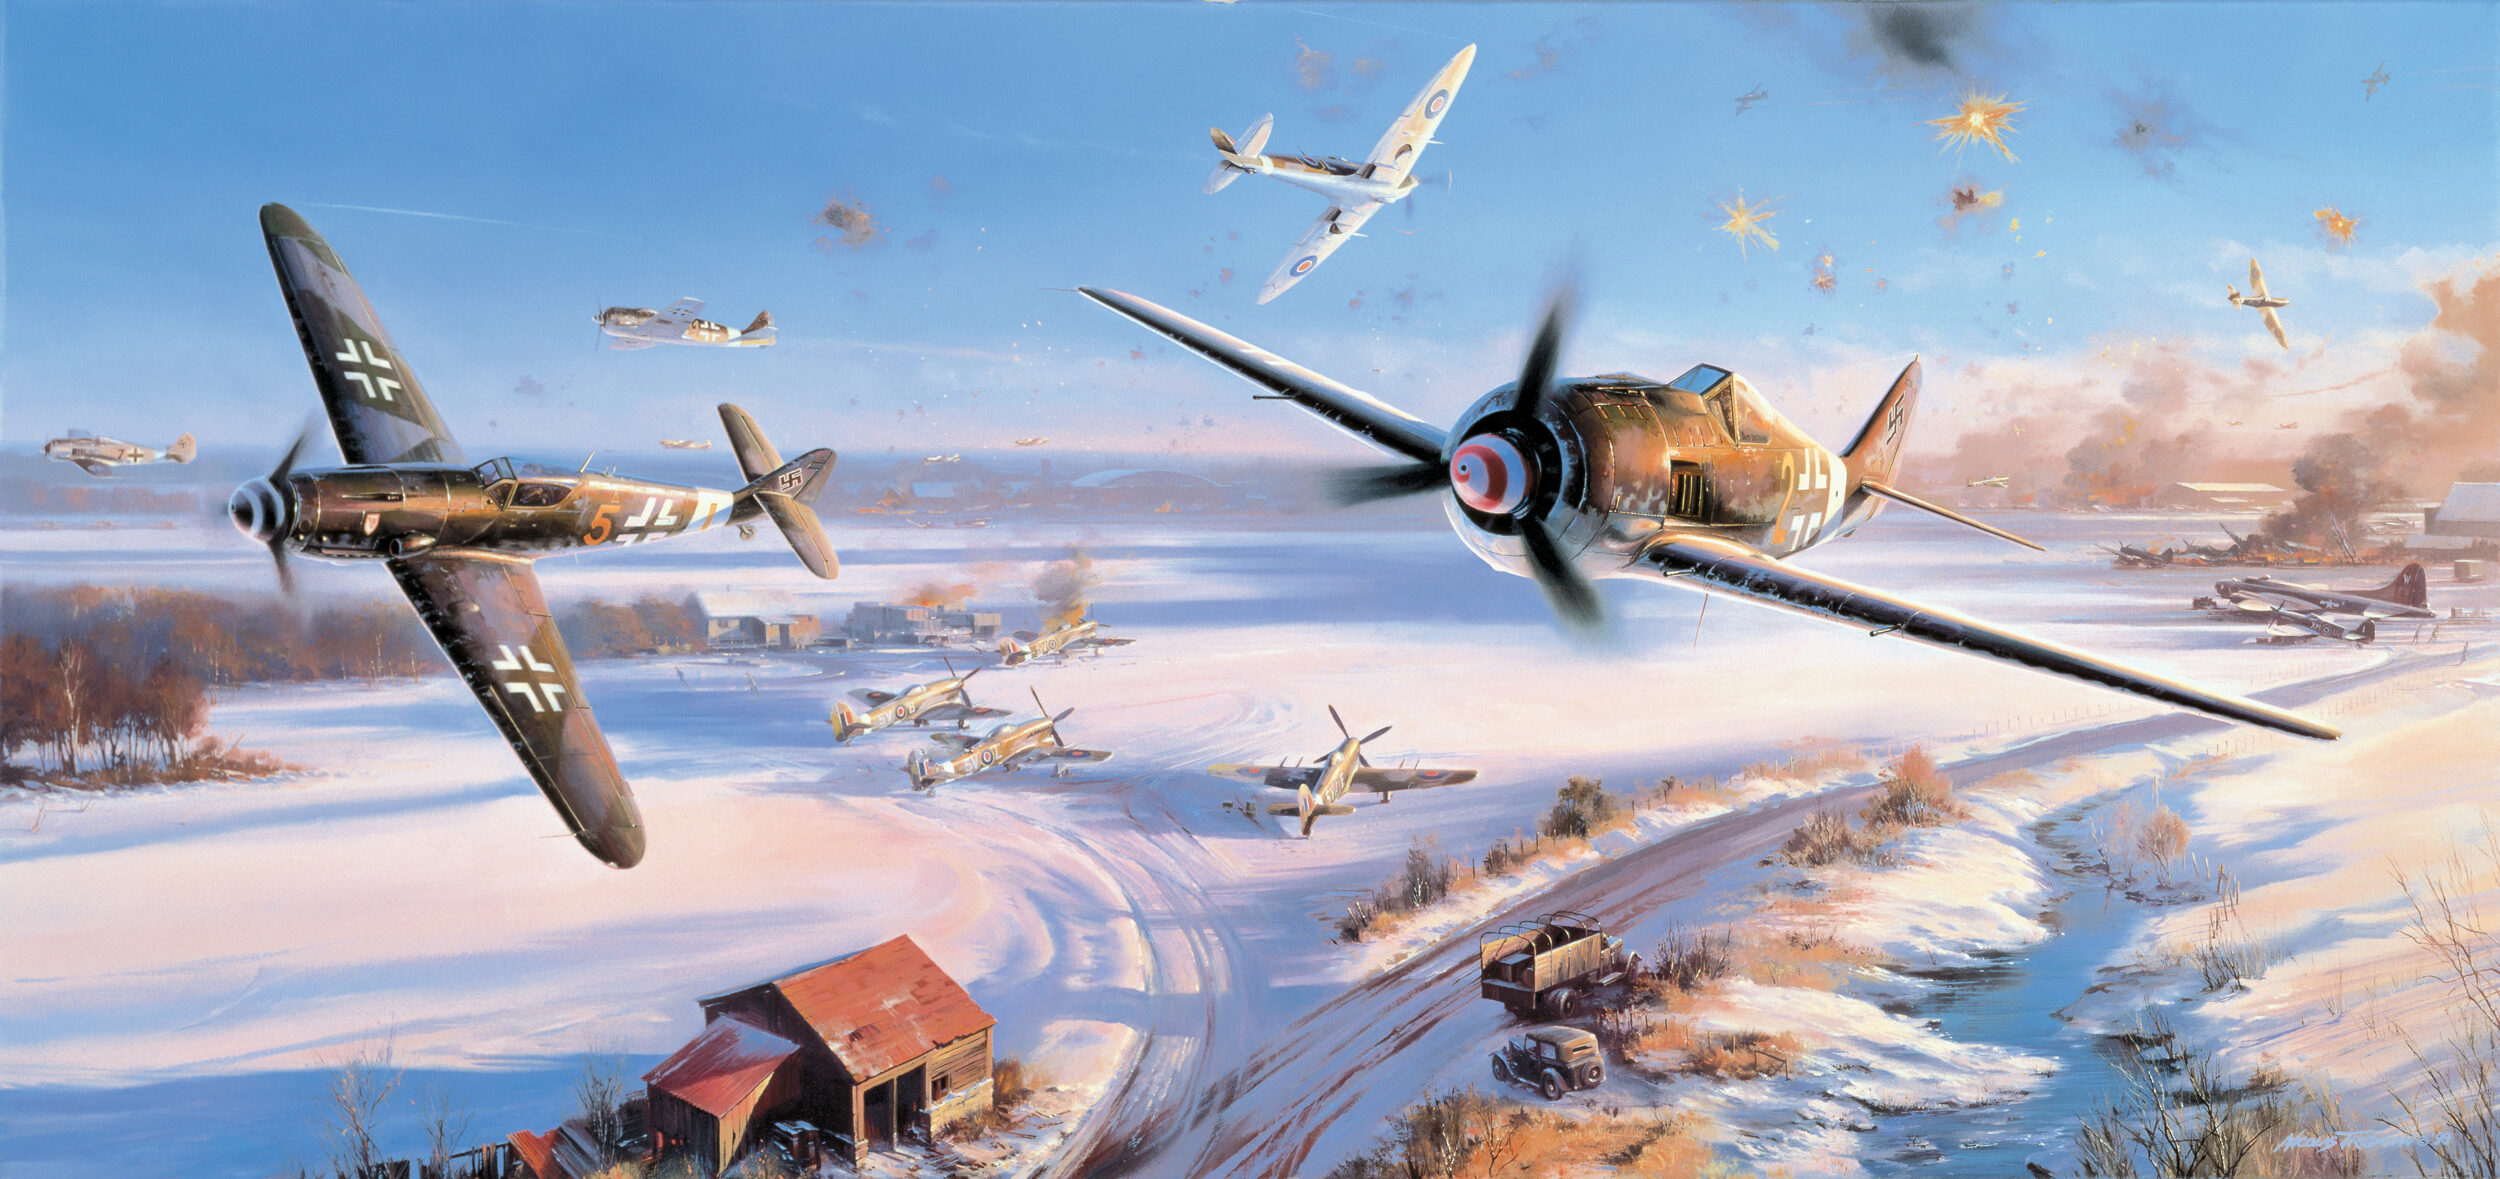 In this painting by artist Nicholas Trudgian, on New Year’s Day 1945, a pair of FW-190s swoop low over an Allied airfield in France as part of a late-war assault plan to cripple Allied air power and help turn the tide of the war in Germany’s favor.